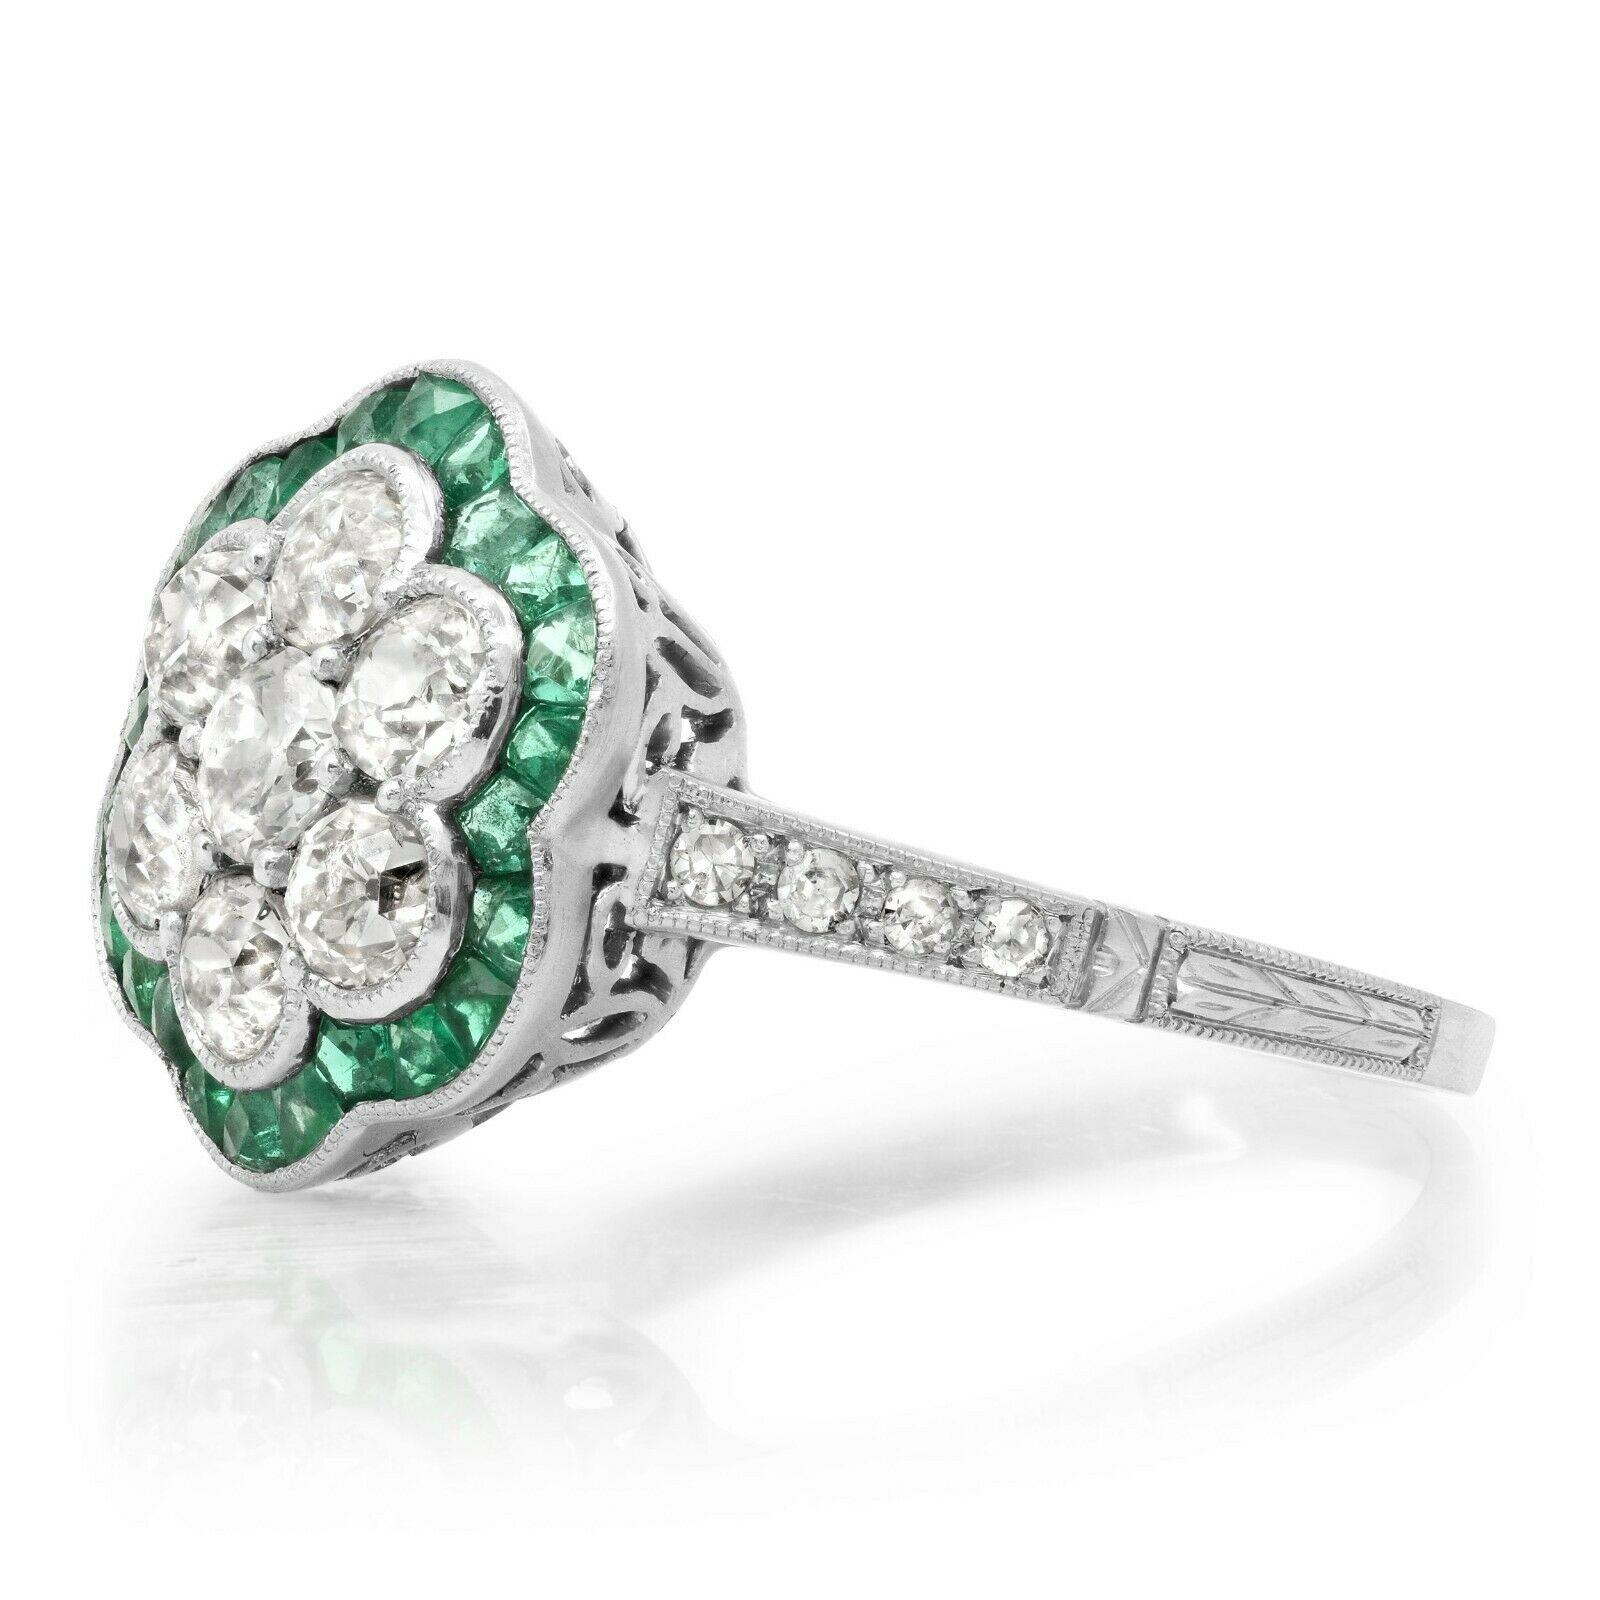 Diamond (1.22 total carat weight) and emerald (0.4 total carat weight) antique inspired cocktail ring in 900 platinum. The ring is designed and handmade locally in Los Angeles by Sage Designs L.A. using earth-mined and conflict free diamonds and